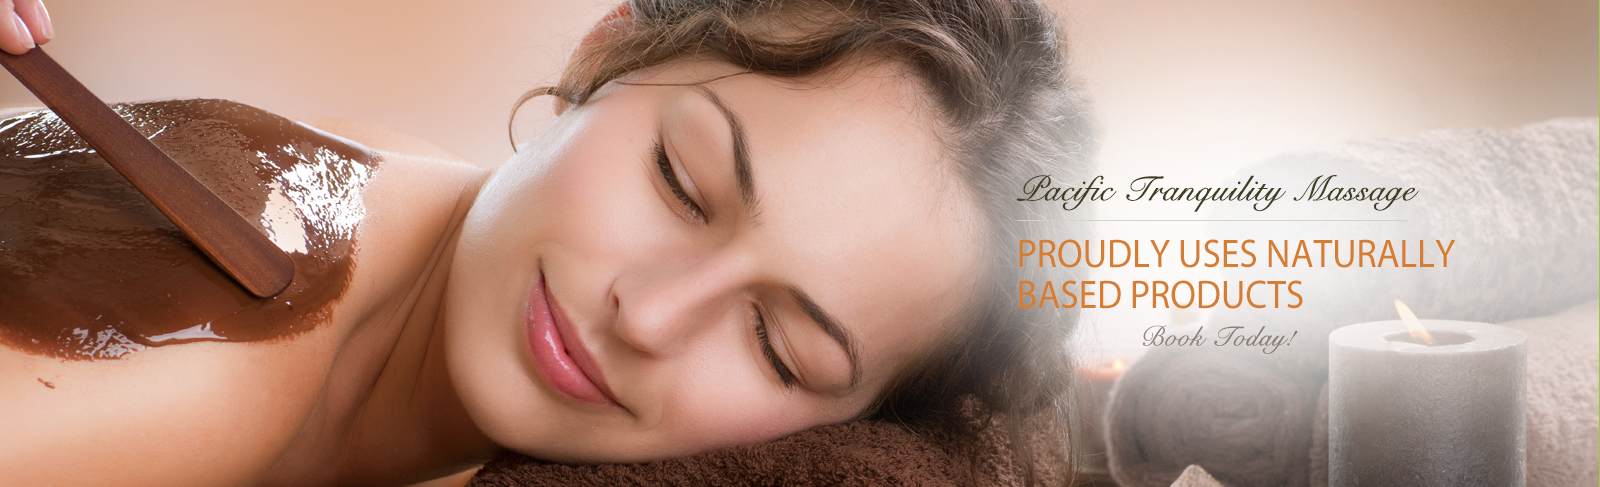 Experience our body treatments which we use naturally based products! Rejuvenate your skin with a monthly body treatment. Book Today! Body Treatments Near Me, spa packages near me, spa treatments near me, massage and spa near me
